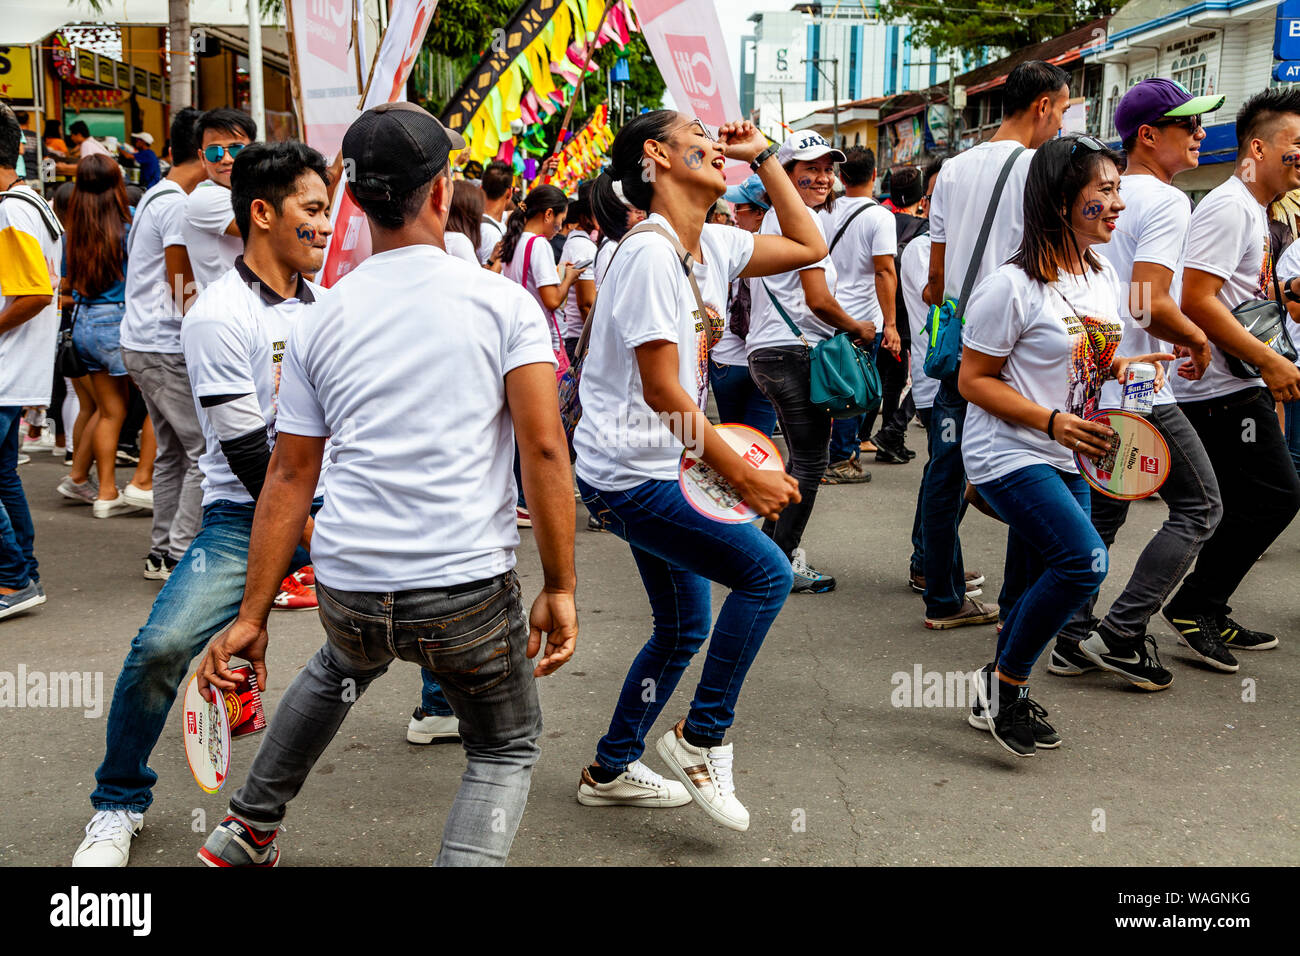 Young Filipinos Dancing In The Street During The Ati-Atihan Festival, Kalibo, Panay Island, Aklan Province, The Philippines Stock Photo